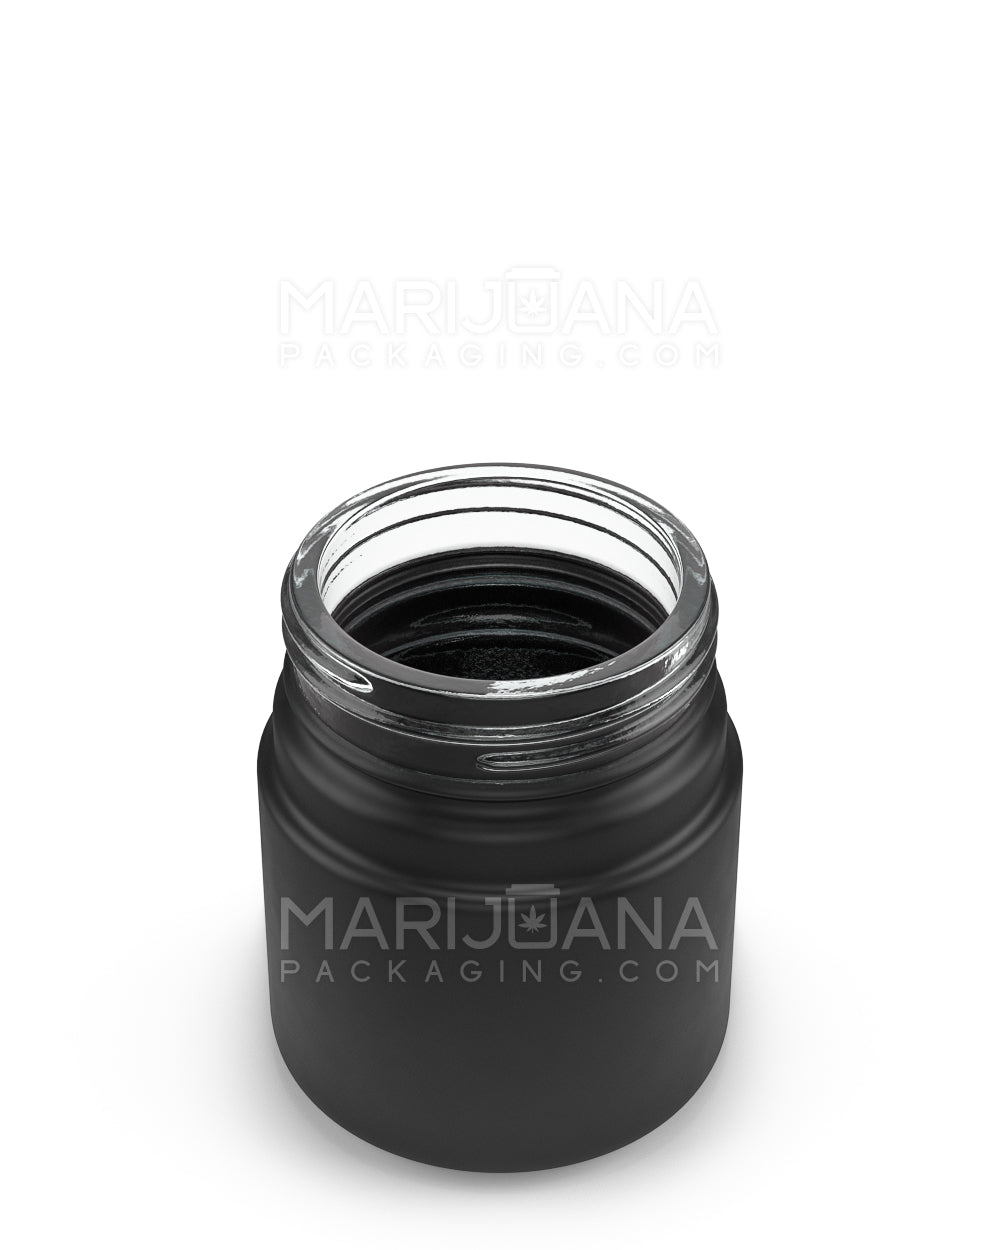 4oz Glass Jars with Black Caps - 7 Grams - 120 Count Glass